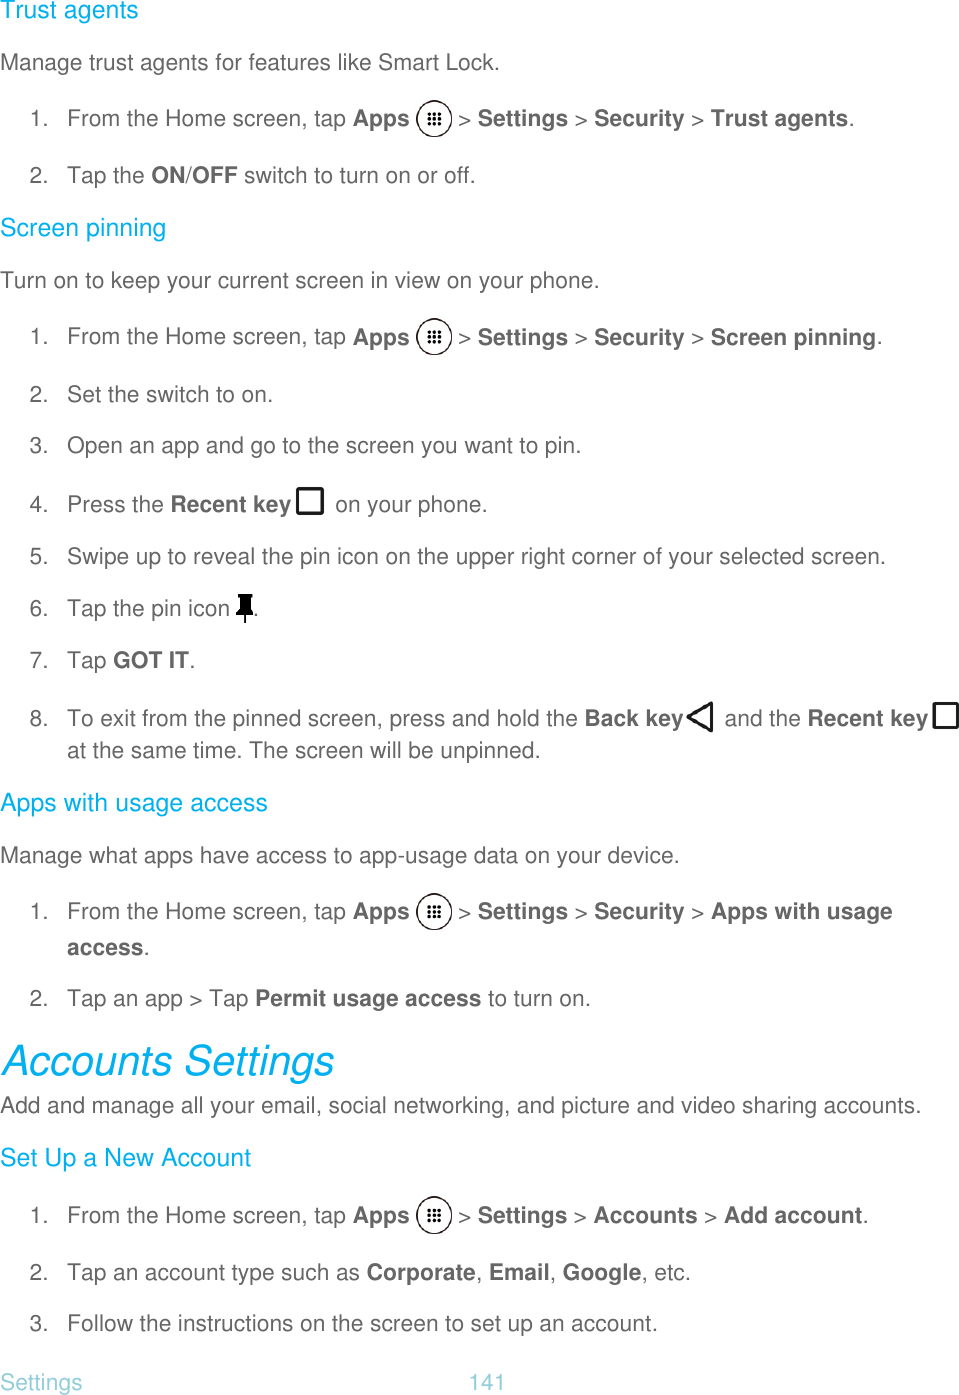 Settings  141   Trust agents Manage trust agents for features like Smart Lock. 1.  From the Home screen, tap Apps   &gt; Settings &gt; Security &gt; Trust agents. 2. Tap the ON/OFF switch to turn on or off. Screen pinning Turn on to keep your current screen in view on your phone. 1.  From the Home screen, tap Apps   &gt; Settings &gt; Security &gt; Screen pinning. 2.  Set the switch to on. 3.  Open an app and go to the screen you want to pin. 4.  Press the Recent key  on your phone. 5.  Swipe up to reveal the pin icon on the upper right corner of your selected screen. 6. Tap the pin icon  . 7. Tap GOT IT. 8.  To exit from the pinned screen, press and hold the Back key  and the Recent key  at the same time. The screen will be unpinned. Apps with usage access Manage what apps have access to app-usage data on your device. 1.  From the Home screen, tap Apps   &gt; Settings &gt; Security &gt; Apps with usage  access. 2. Tap an app &gt; Tap Permit usage access to turn on. Accounts Settings Add and manage all your email, social networking, and picture and video sharing accounts. Set Up a New Account 1.  From the Home screen, tap Apps   &gt; Settings &gt; Accounts &gt; Add account. 2. Tap an account type such as Corporate, Email, Google, etc. 3.  Follow the instructions on the screen to set up an account. 